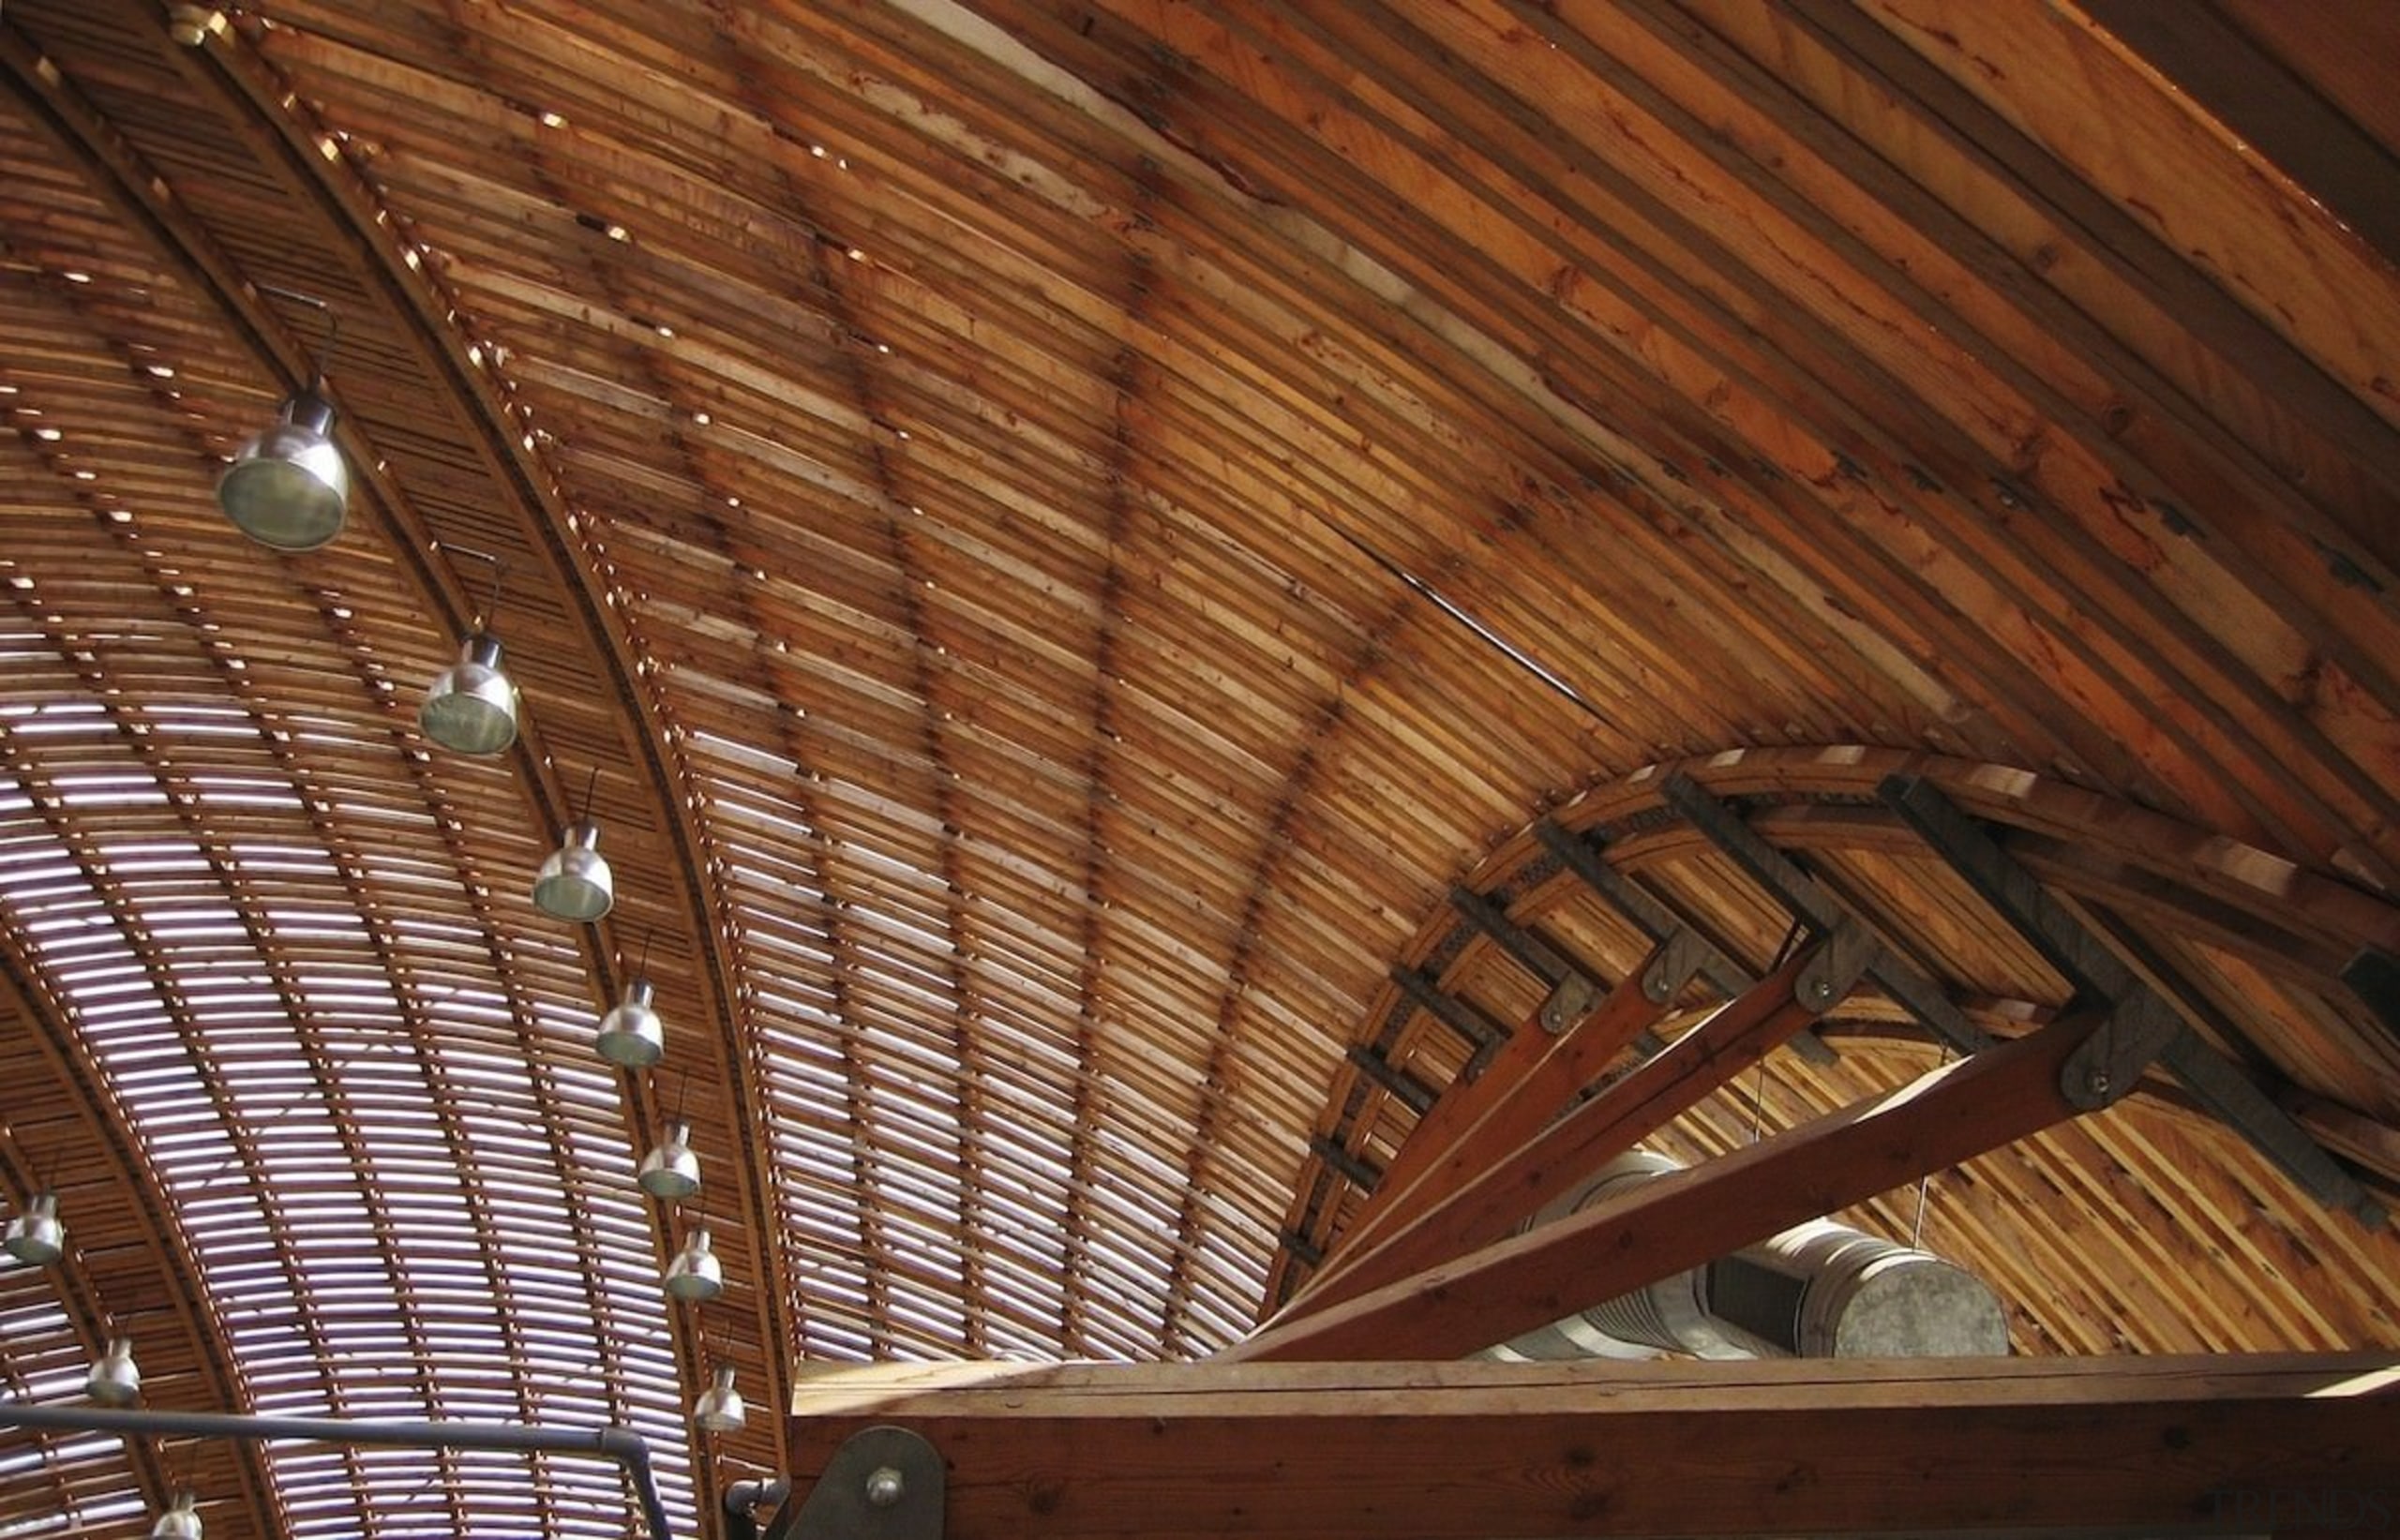 Forestry Branch – Marche-en-Famenne - Forestry Branch – attic, beam, ceiling, daylighting, roof, wood, wood stain, brown